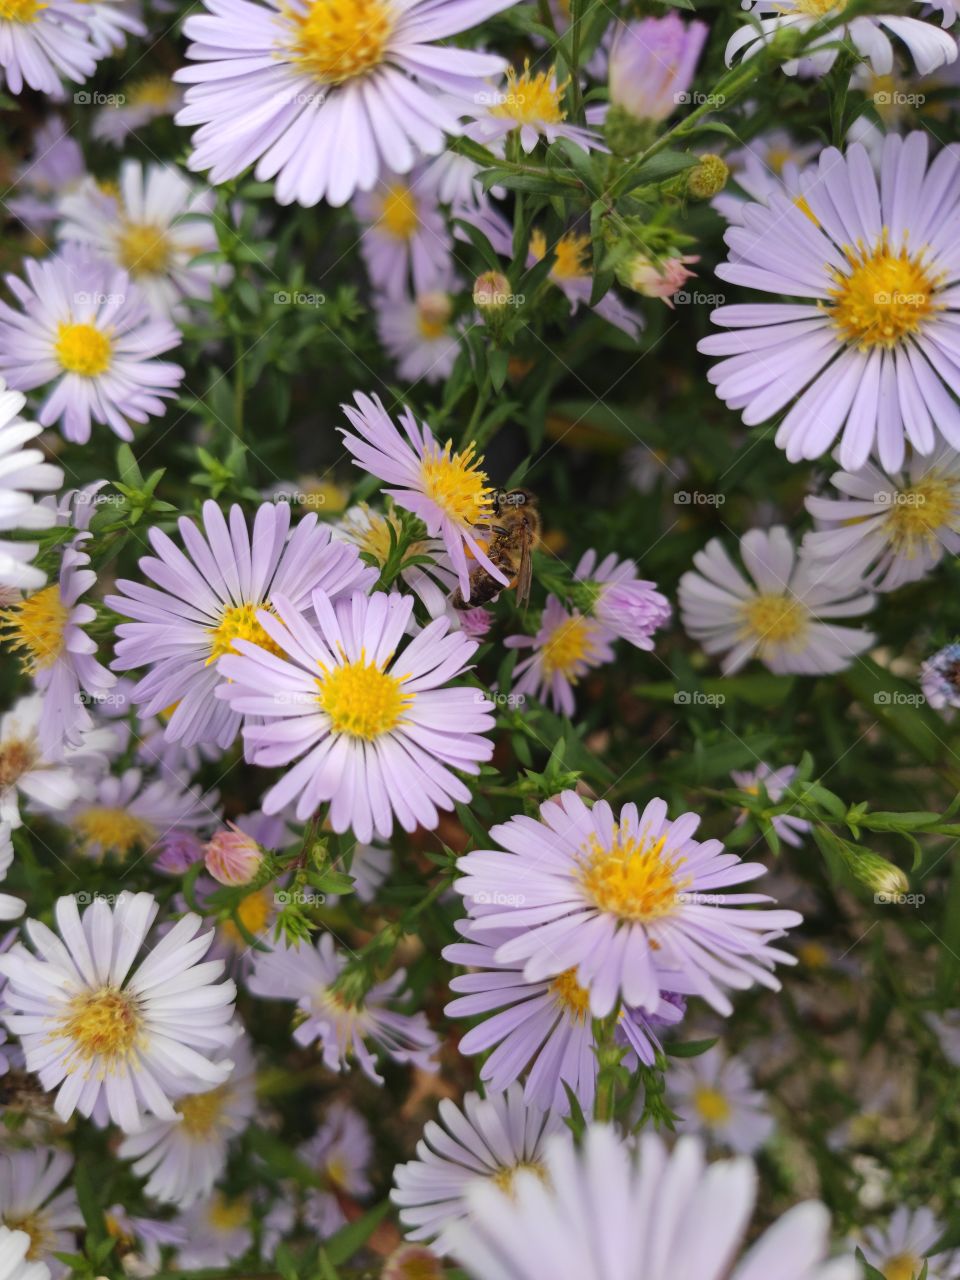 Flowers in the park with a blurred background in the background